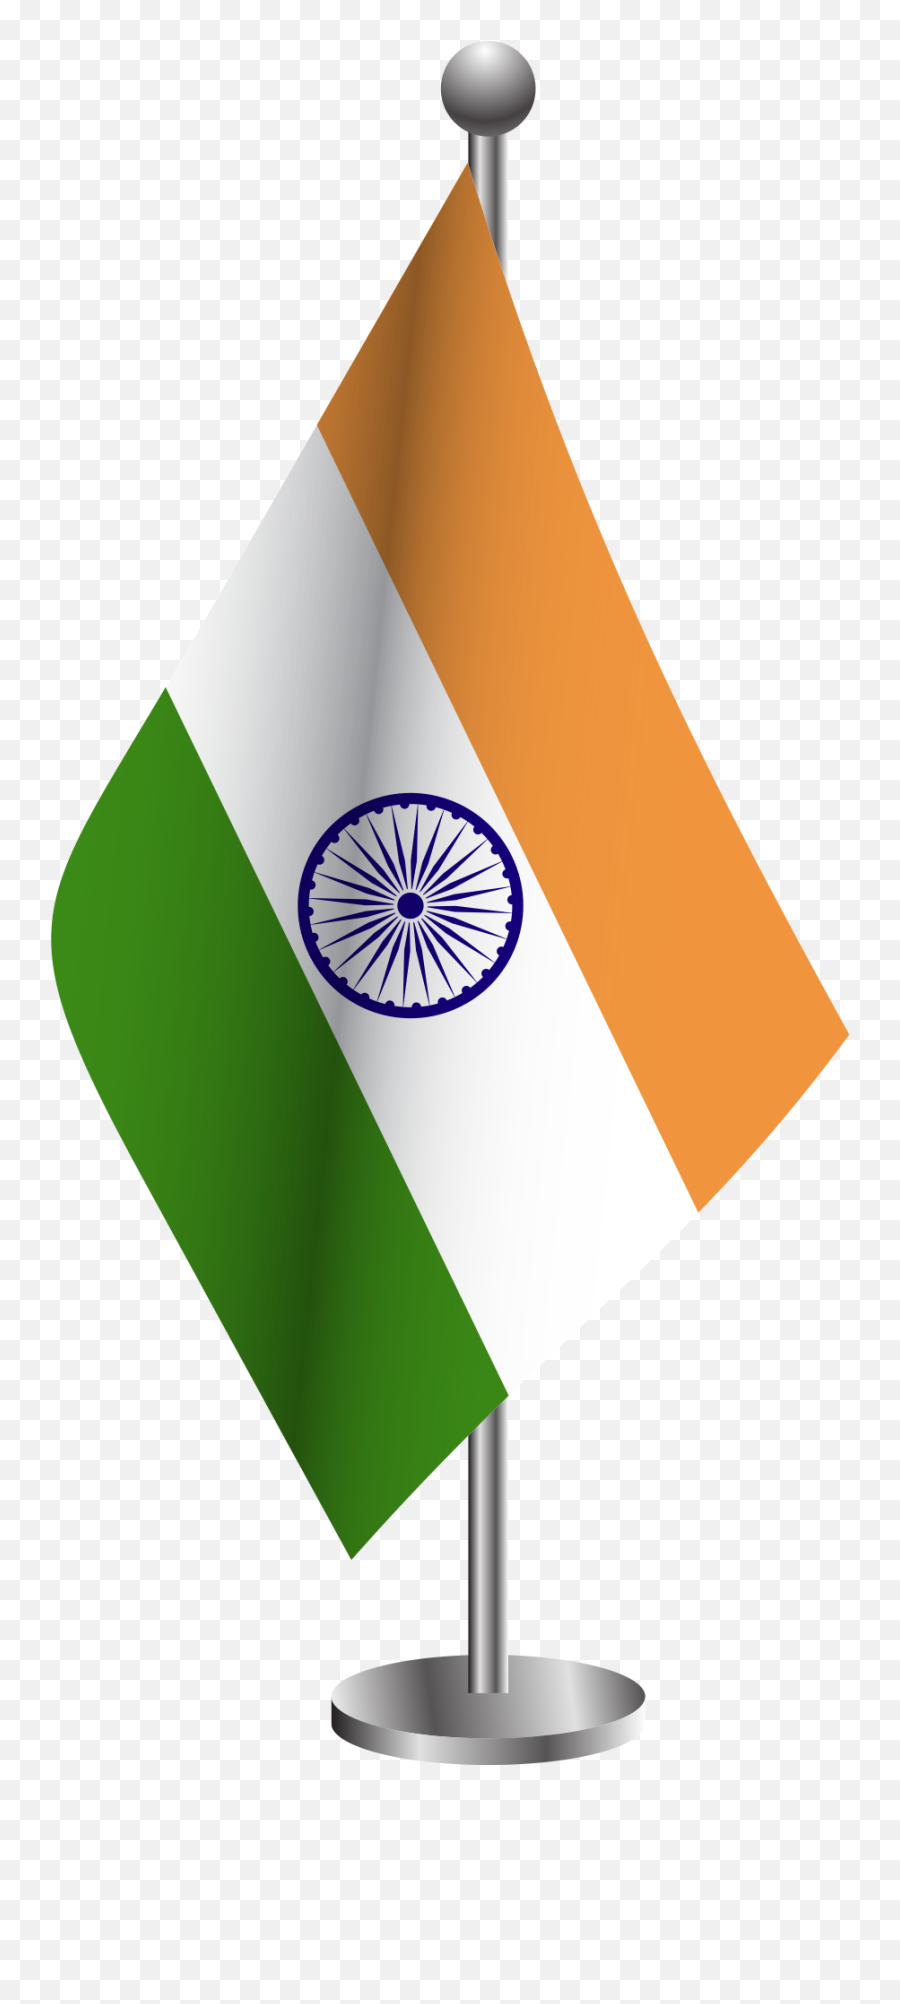 Download - Indian Flag Clipart Png Full Size Png Download India Independence Day Stickers,Indian Flag Png